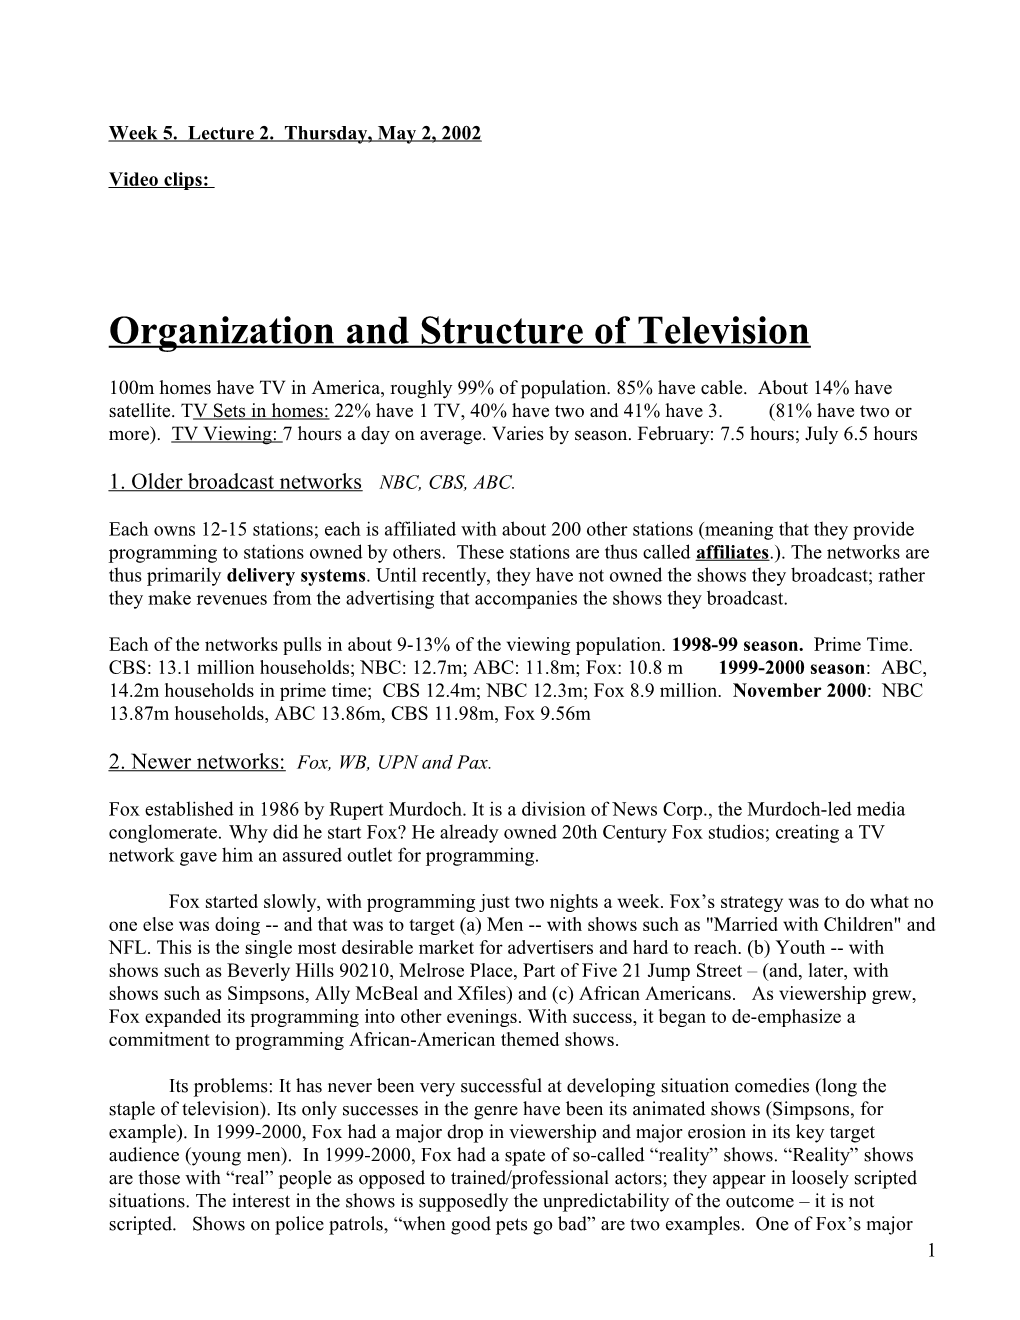 Organization and Structure of Television